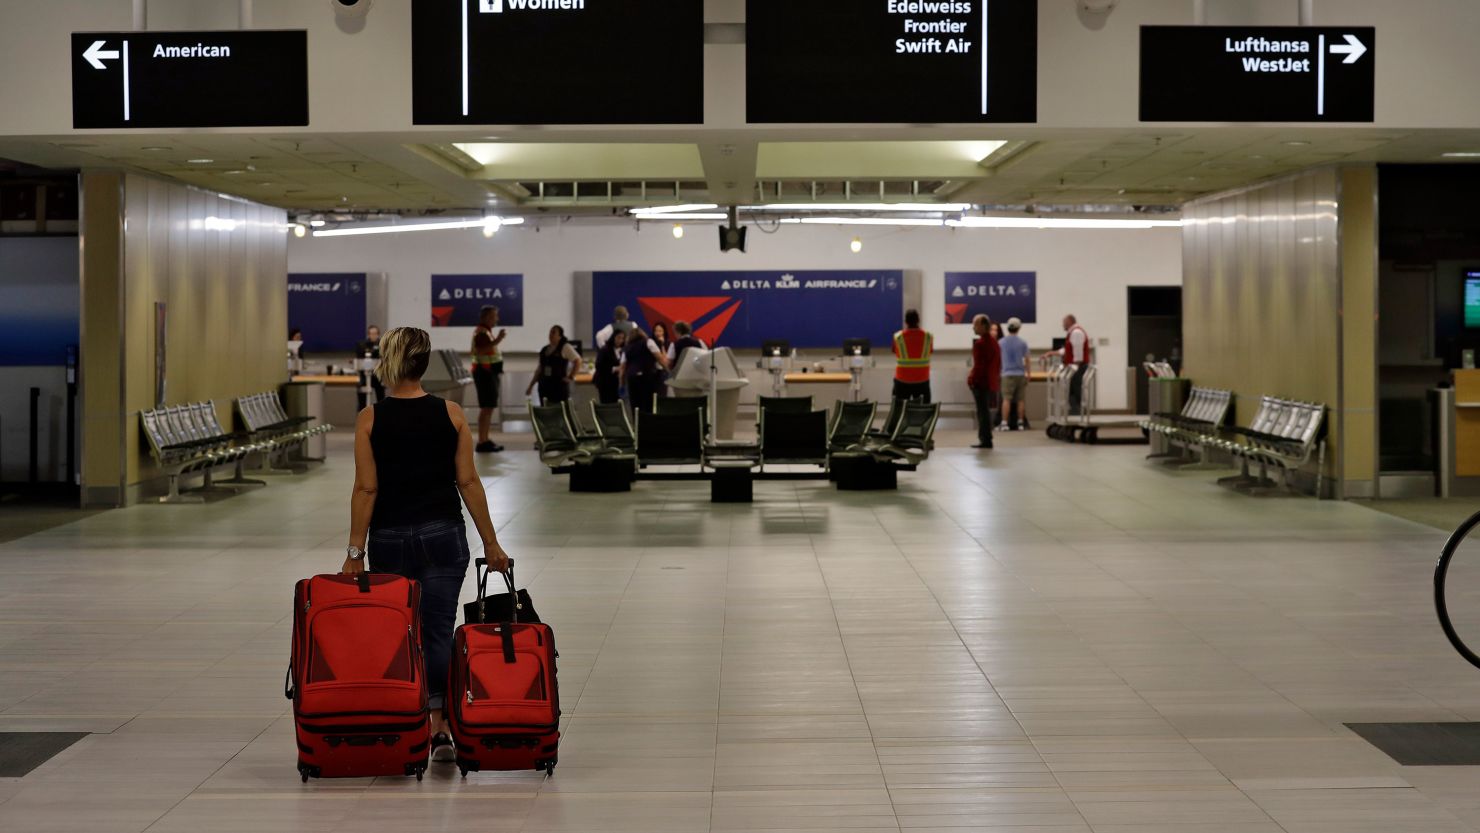 A passenger carries her luggage through a nearly deserted terminal at the Tampa International Airport in April 2020.